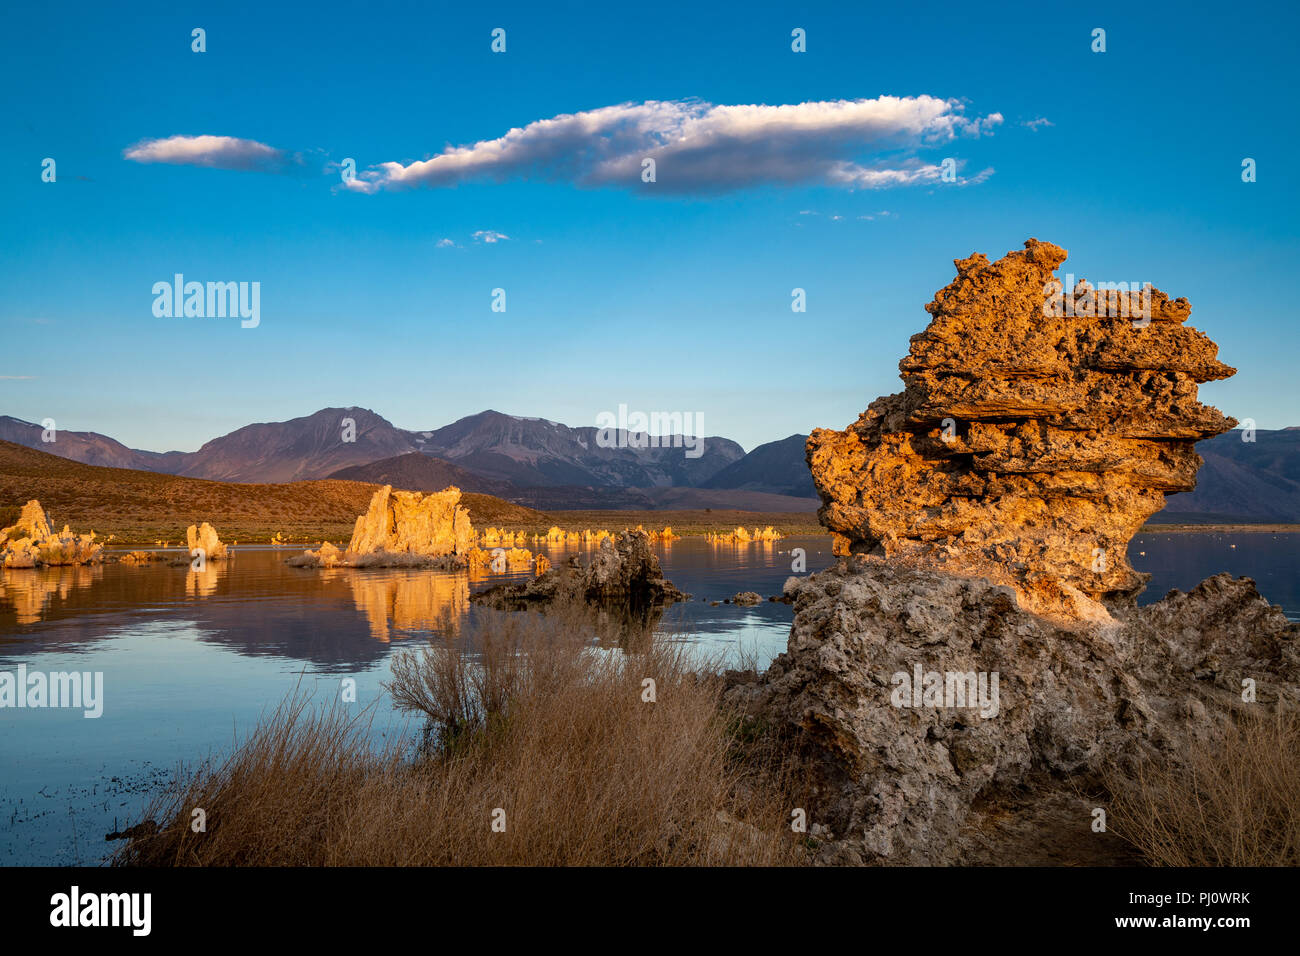 Sunrise at California's Mono Lake in the Eastern Sierra Nevada mountains off of US Highway 395 Stock Photo